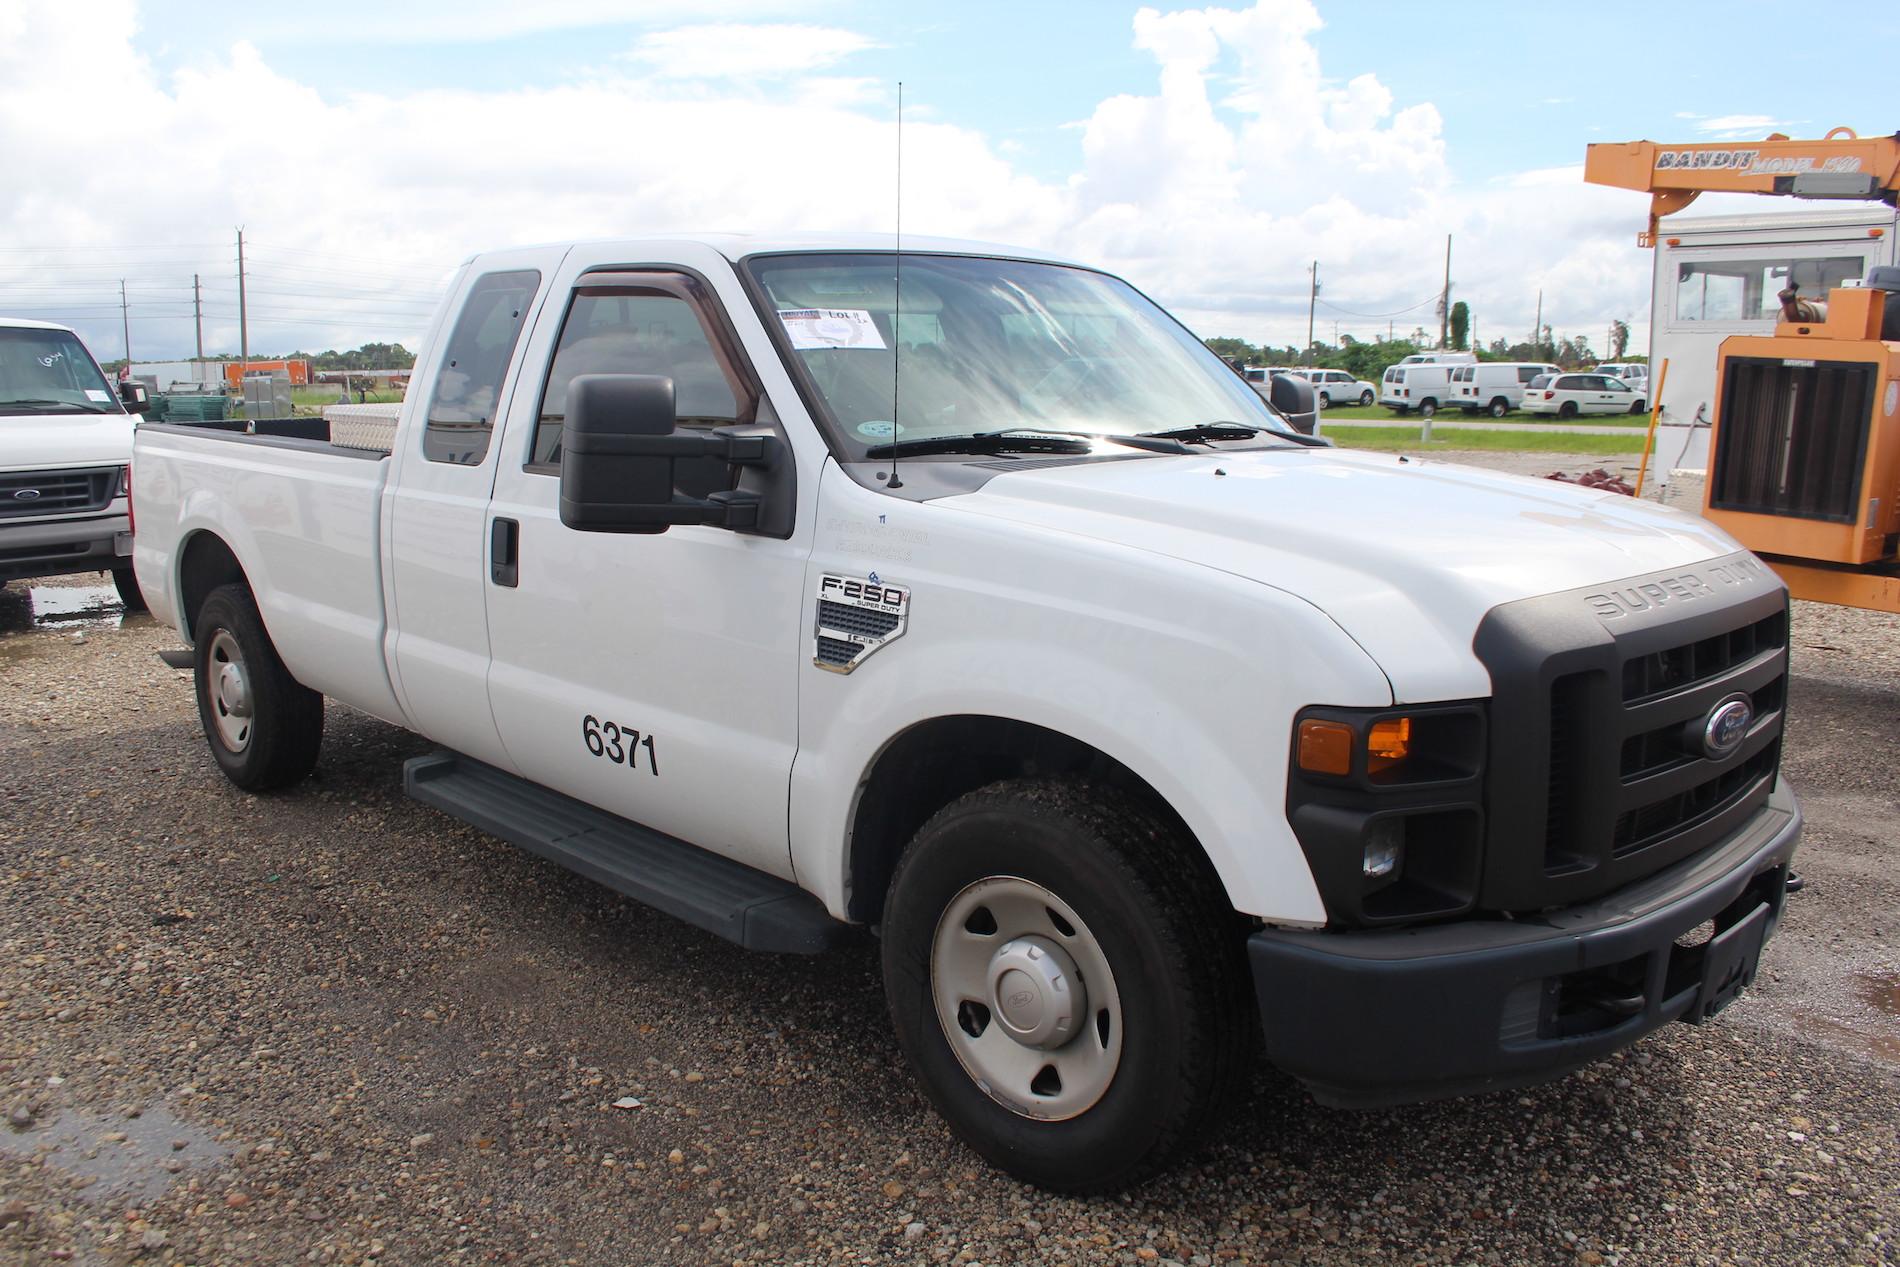 2009 Ford F-250 Extended Cab Lift Gate Pickup Truck